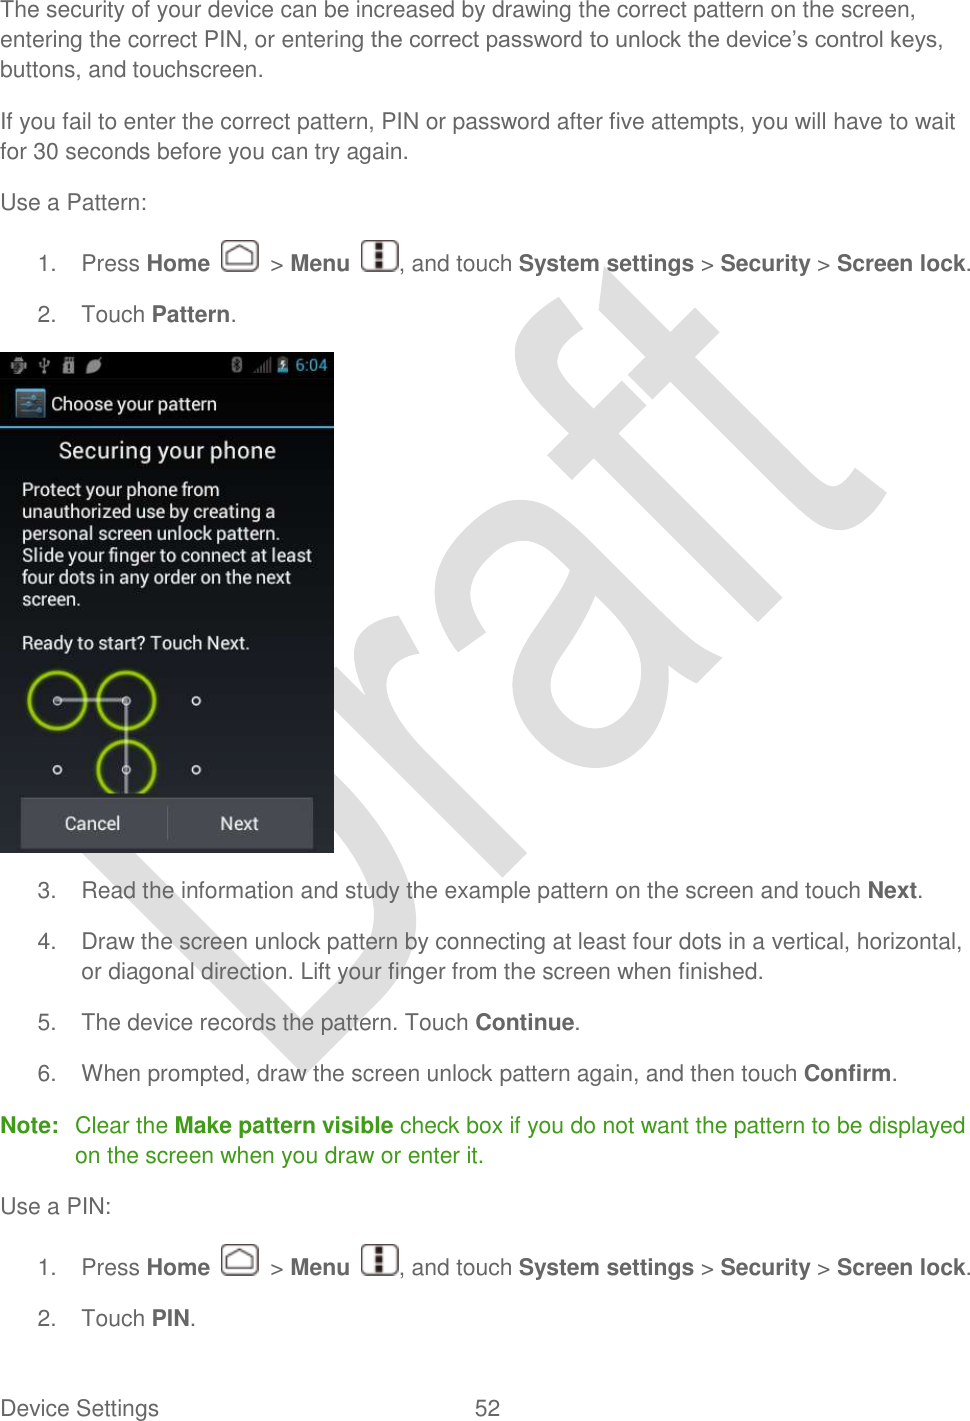  Device Settings  52   The security of your device can be increased by drawing the correct pattern on the screen, entering the correct PIN, or entering the correct password to unlock the device‟s control keys, buttons, and touchscreen. If you fail to enter the correct pattern, PIN or password after five attempts, you will have to wait for 30 seconds before you can try again. Use a Pattern: 1.  Press Home    &gt; Menu  , and touch System settings &gt; Security &gt; Screen lock. 2.  Touch Pattern.  3.  Read the information and study the example pattern on the screen and touch Next. 4.  Draw the screen unlock pattern by connecting at least four dots in a vertical, horizontal, or diagonal direction. Lift your finger from the screen when finished. 5.  The device records the pattern. Touch Continue. 6.  When prompted, draw the screen unlock pattern again, and then touch Confirm. Note:  Clear the Make pattern visible check box if you do not want the pattern to be displayed on the screen when you draw or enter it. Use a PIN: 1.  Press Home    &gt; Menu  , and touch System settings &gt; Security &gt; Screen lock. 2.  Touch PIN. 